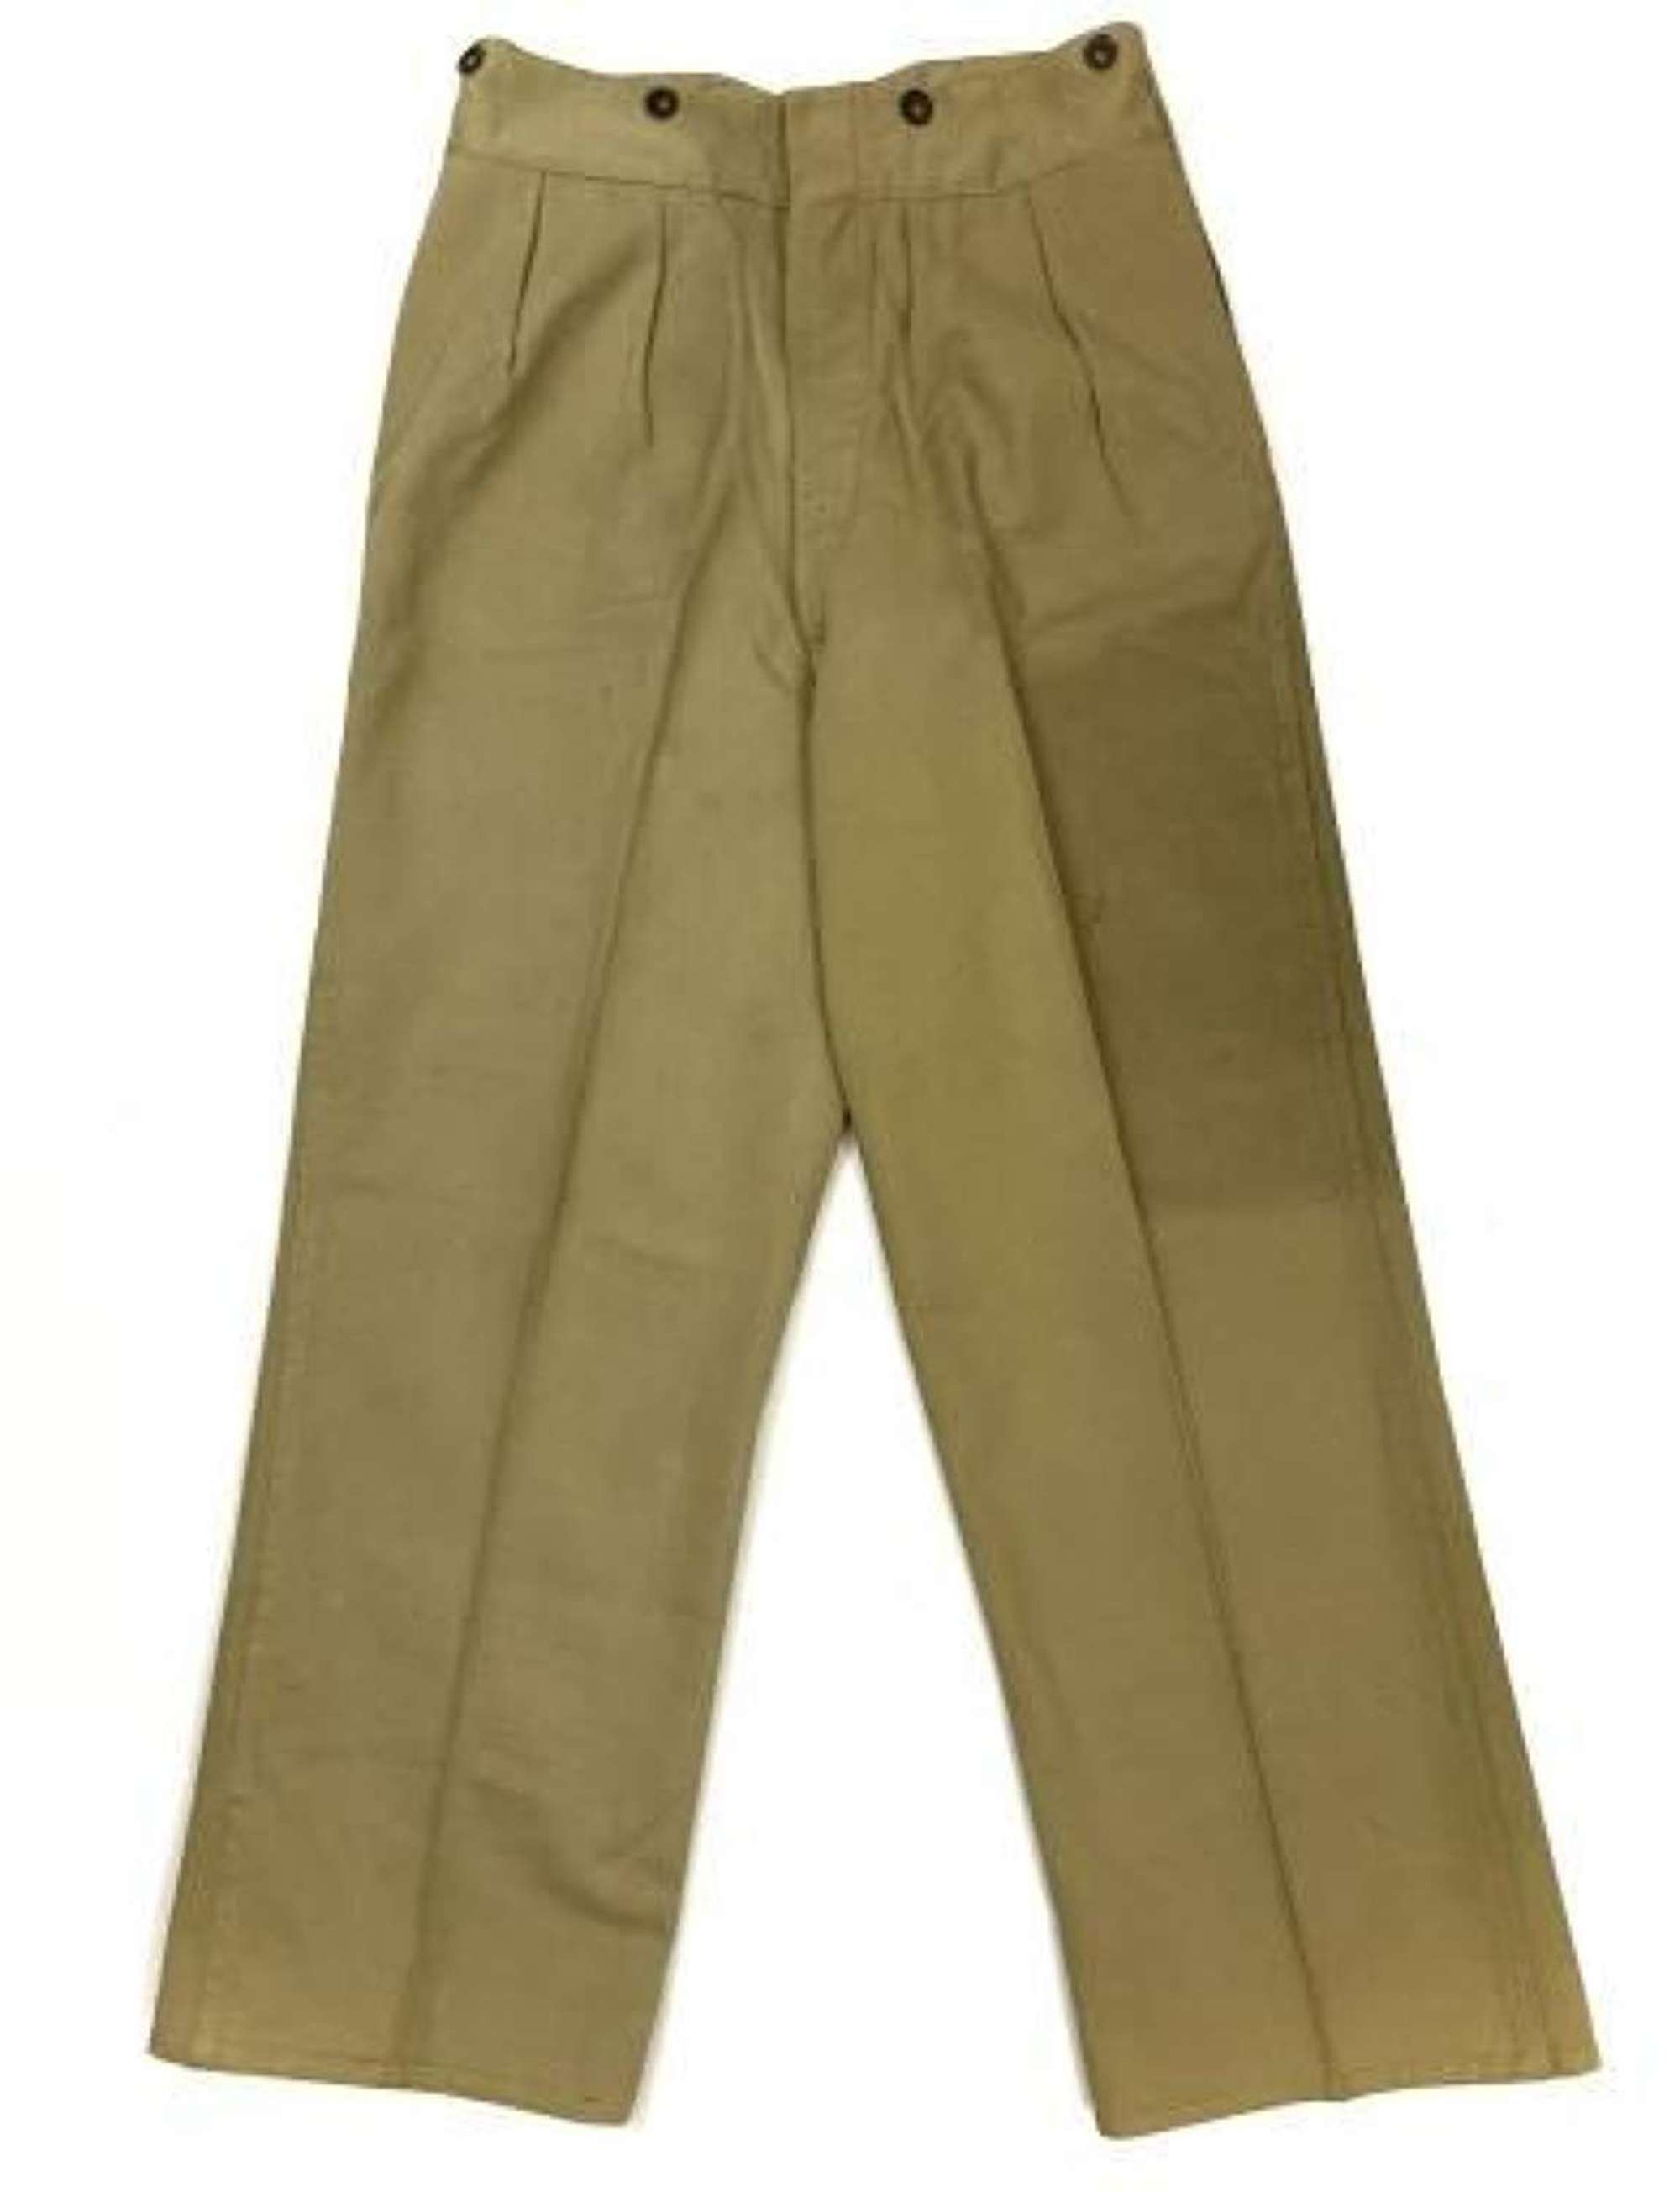 Original 1941 Dated Indian Made Khaki Drill Trousers